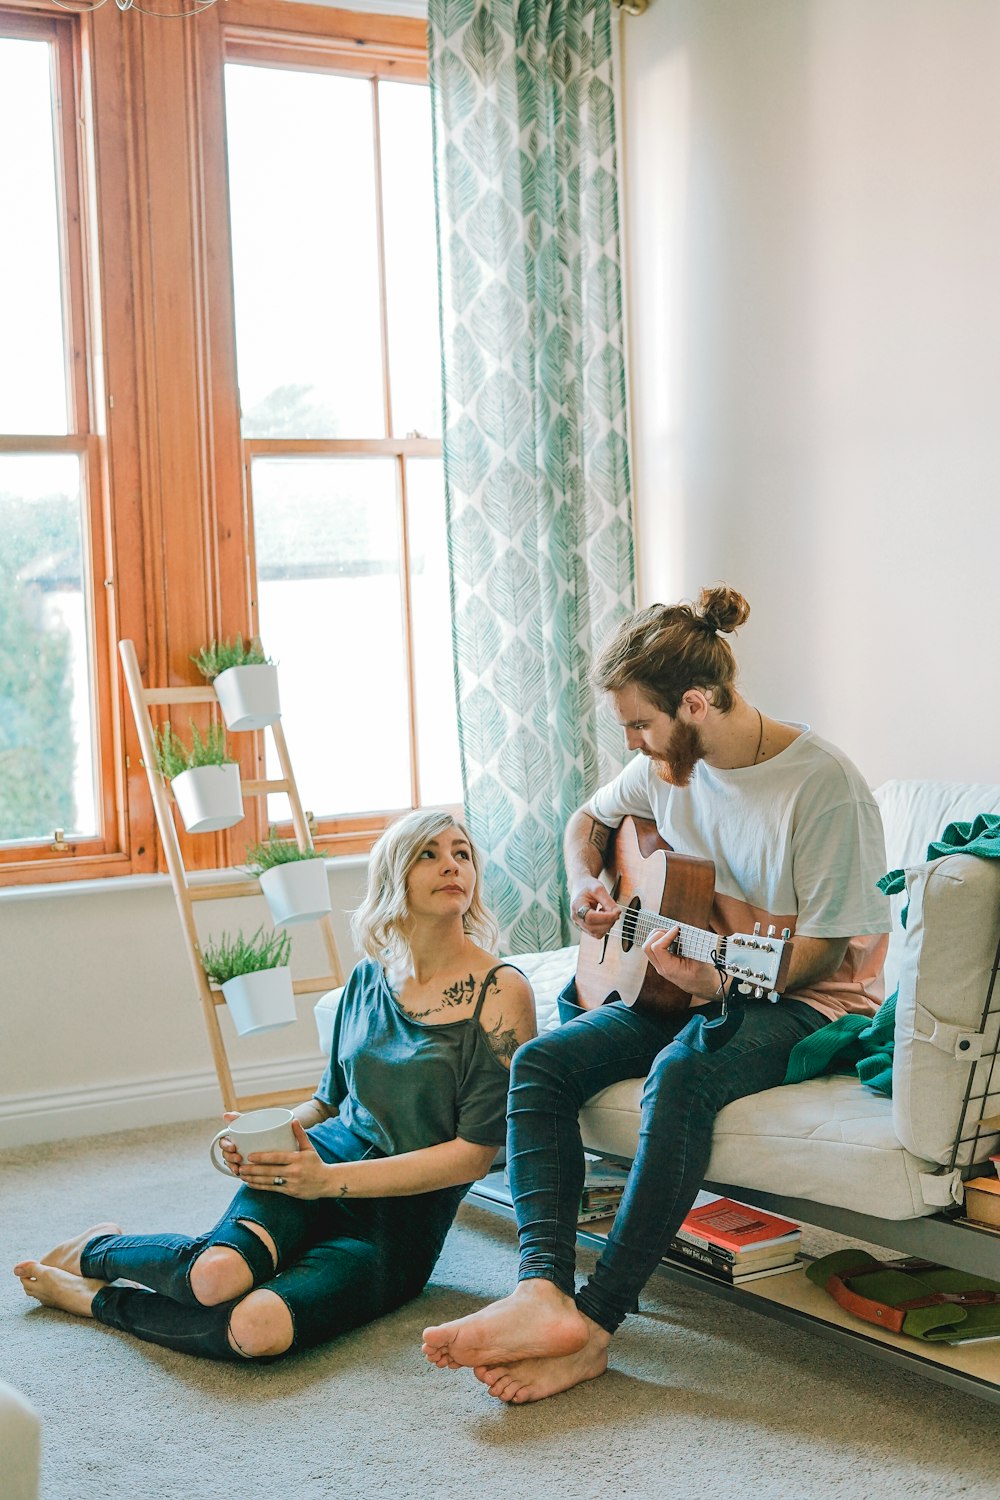 man sitting on sofa playing guitar looking at girl sitting on the ground near window inside room